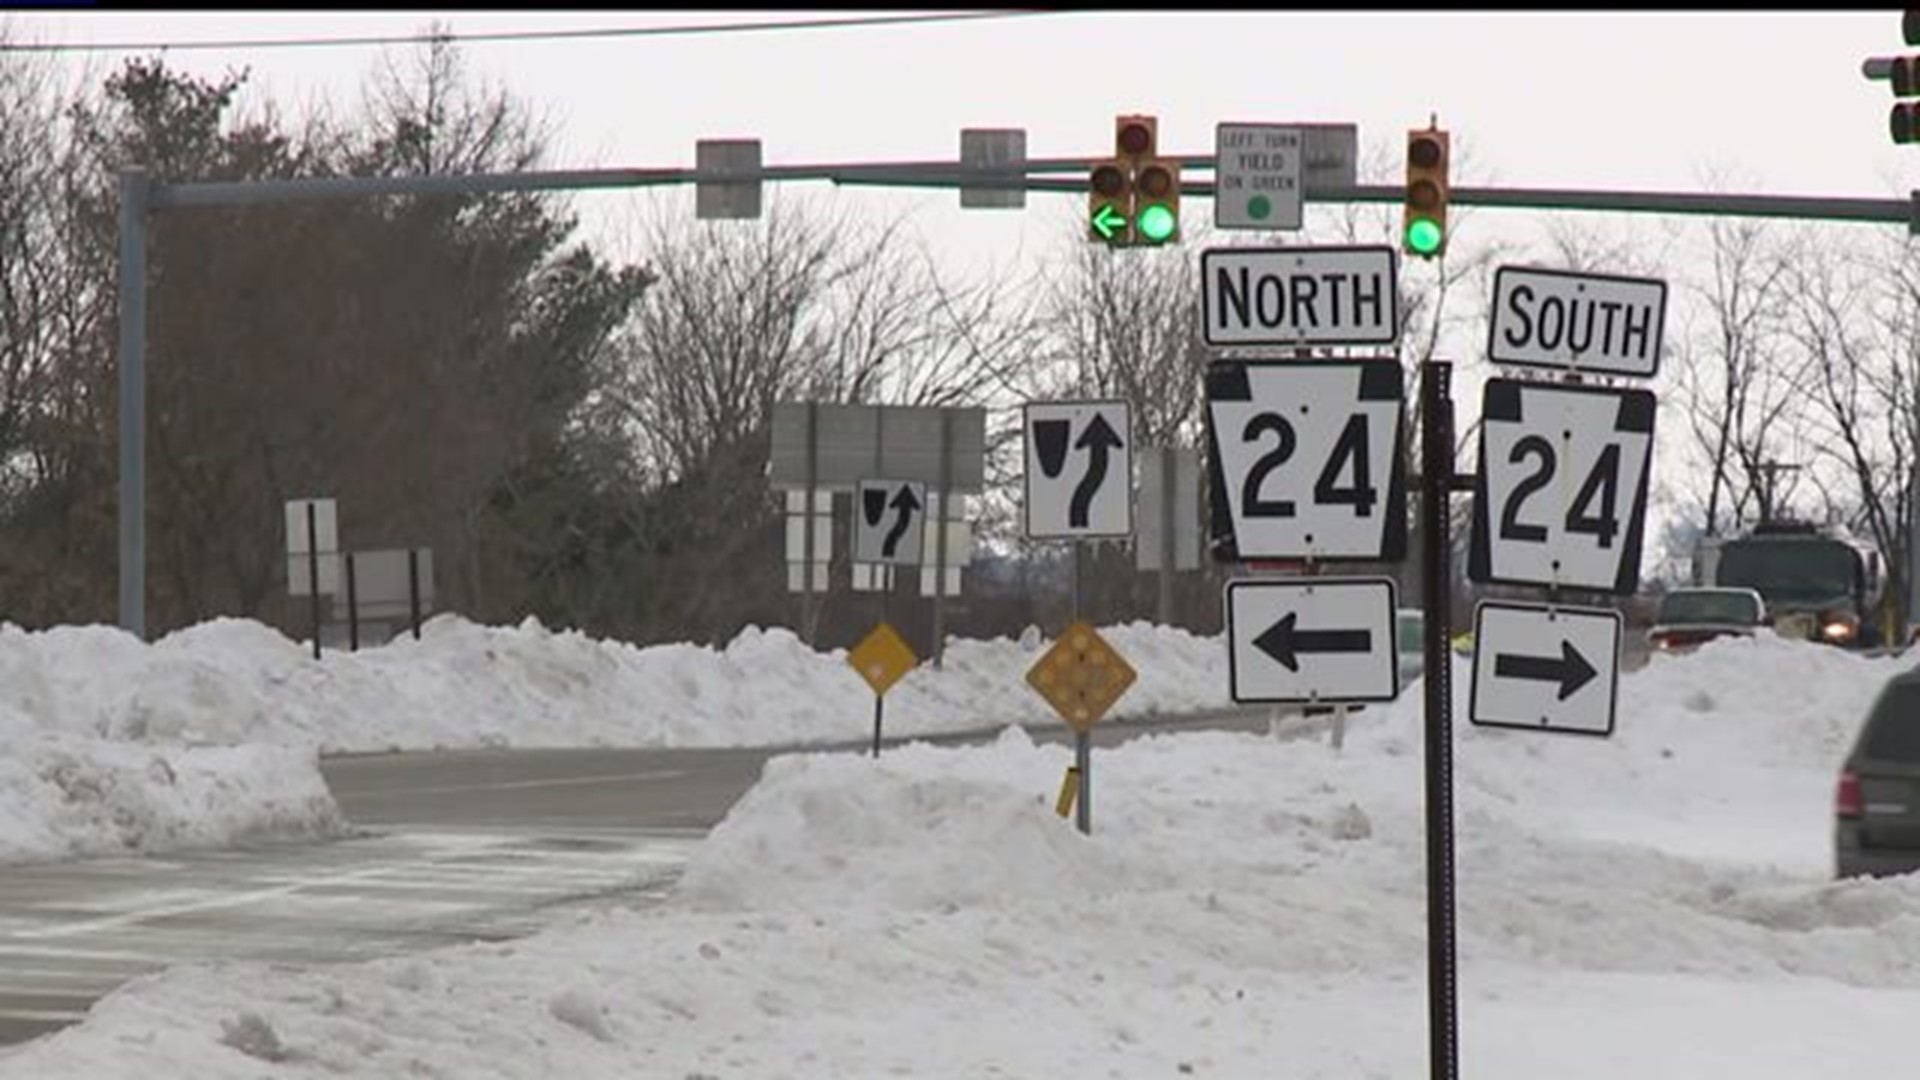 High snow piles create traffic nightmares at intersections